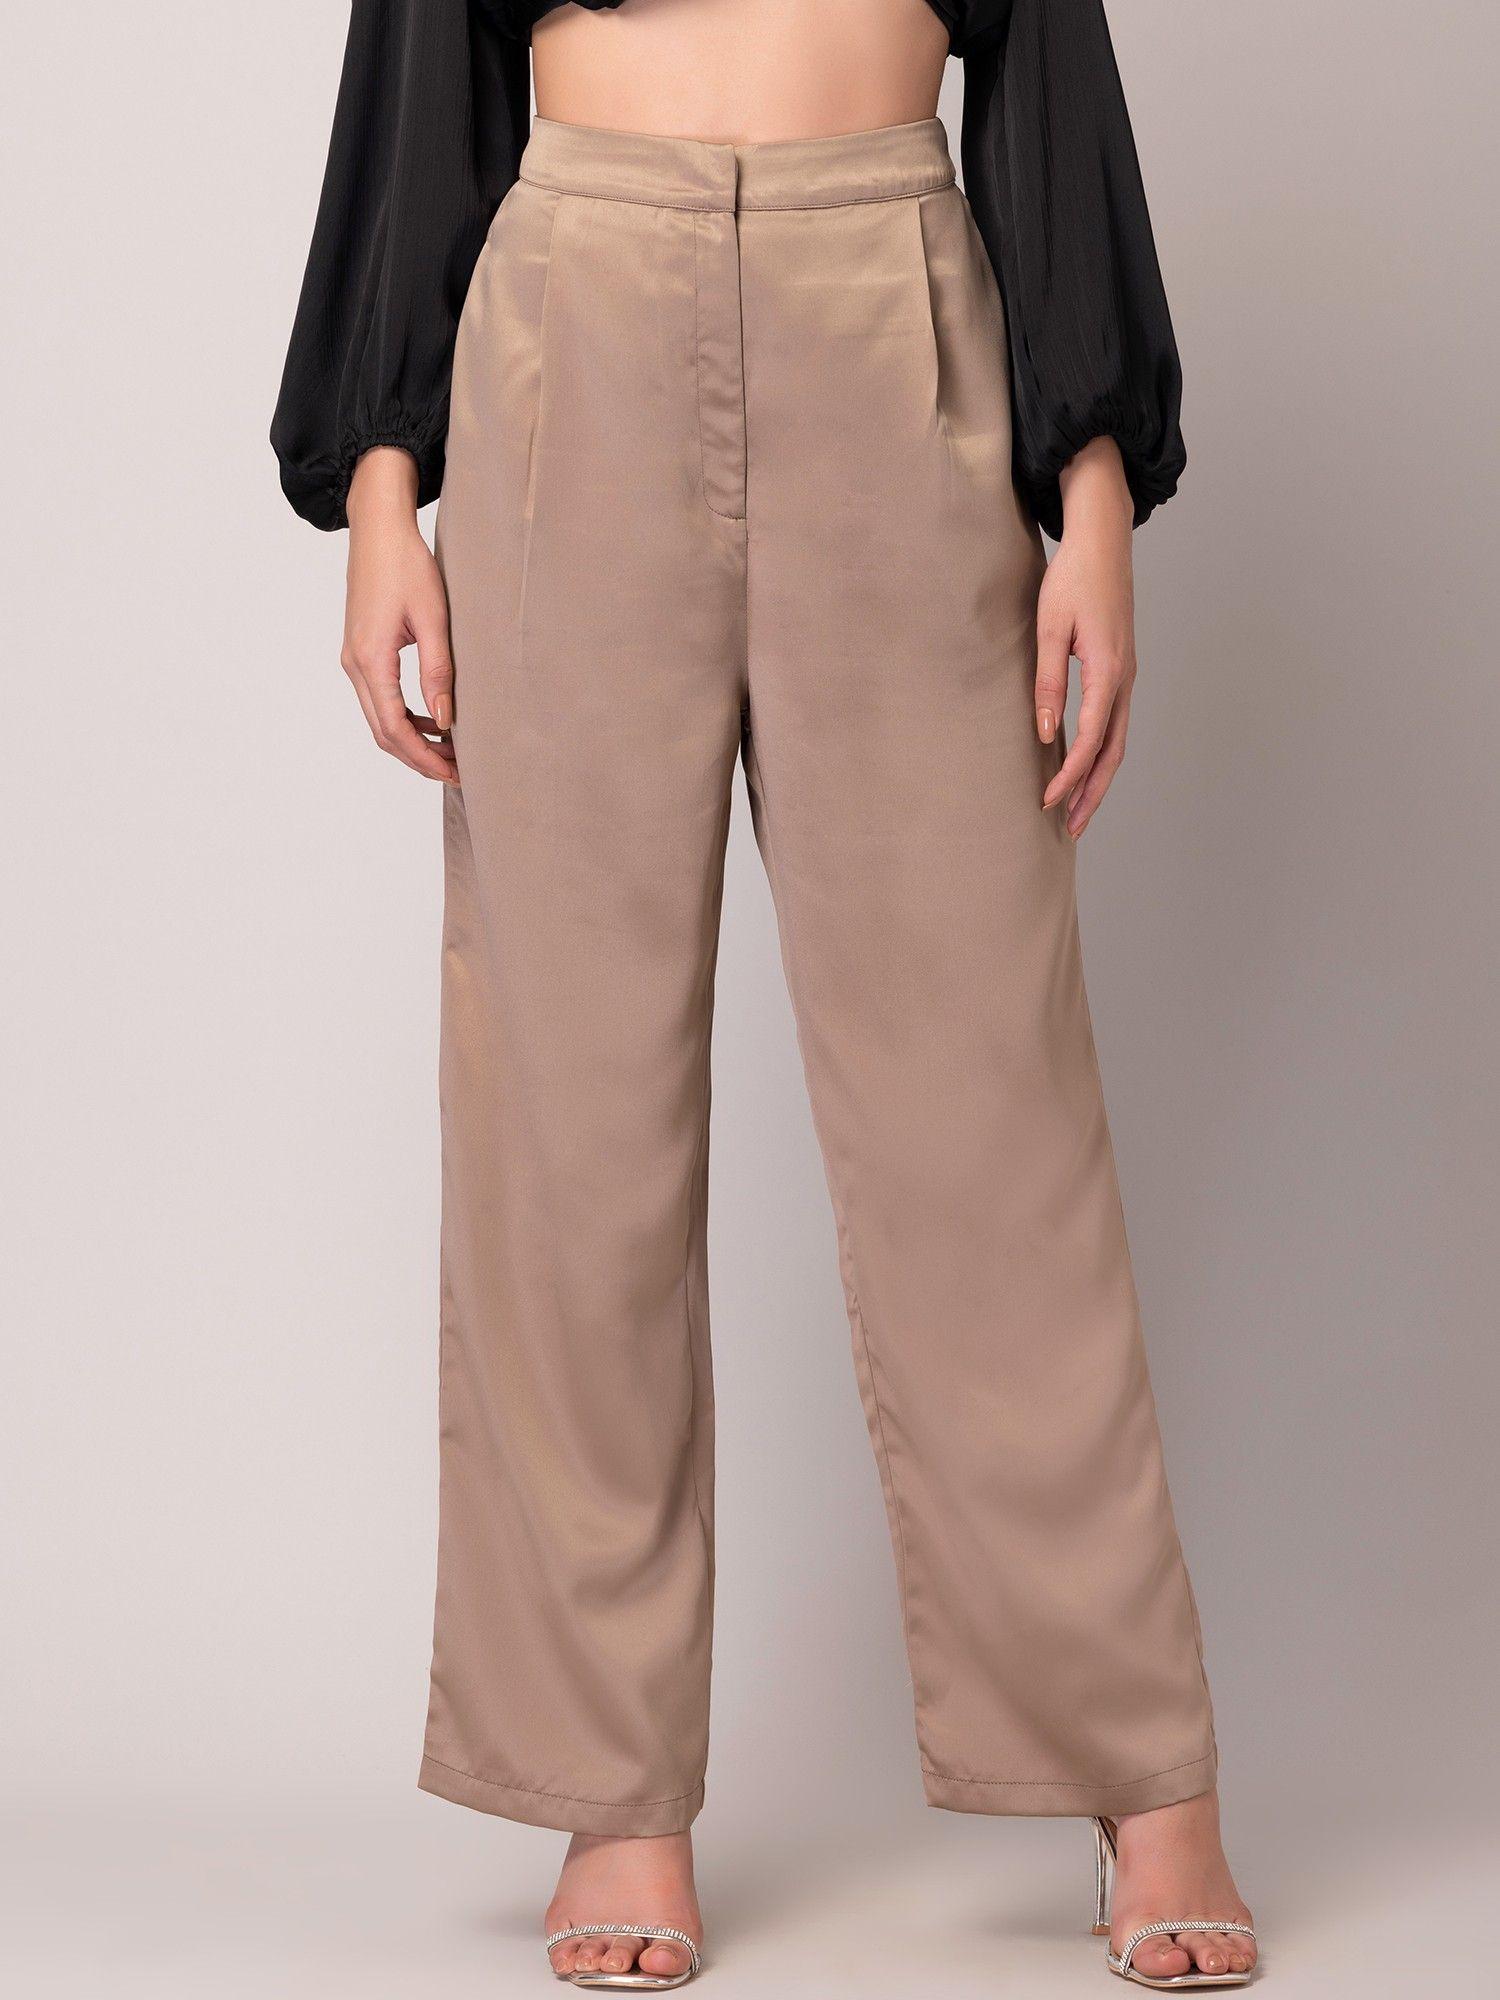 brown high rise straight pants